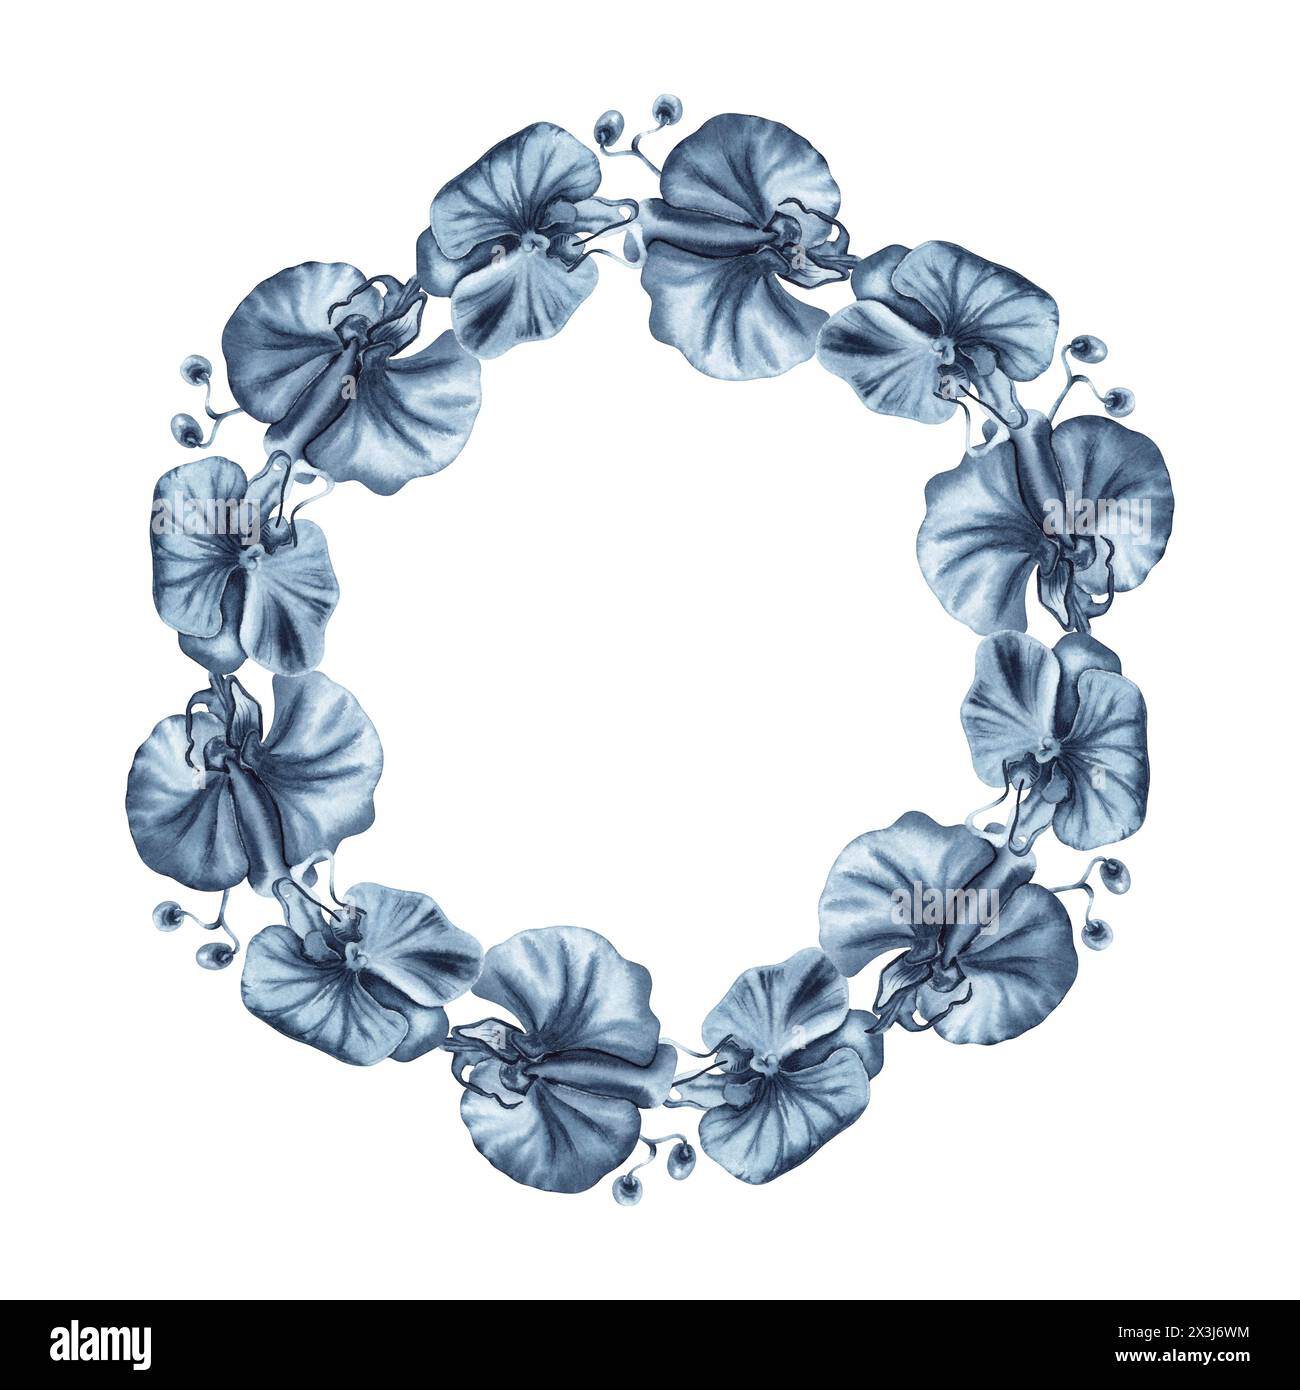 Floral wreath with blue orchid flowers and buds. Hand drawn watercolor illustration isolated on white background. Indigo monochrome round frame Stock Photo